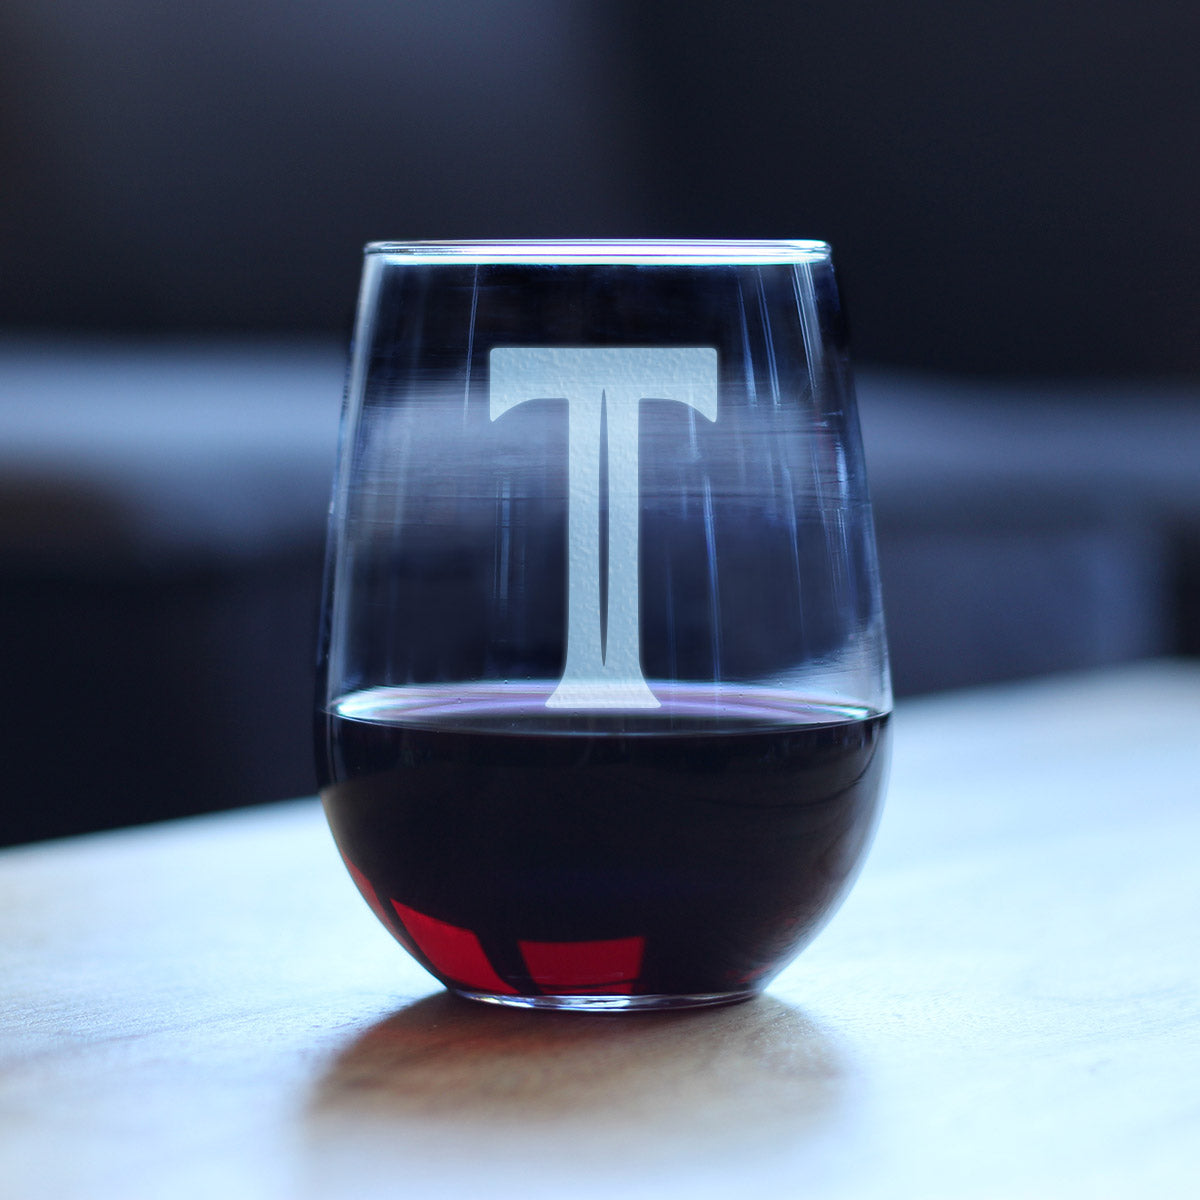 Monogram Bold Letter T - Stemless Wine Glass - Personalized Gifts for Women and Men - Large Engraved Glasses